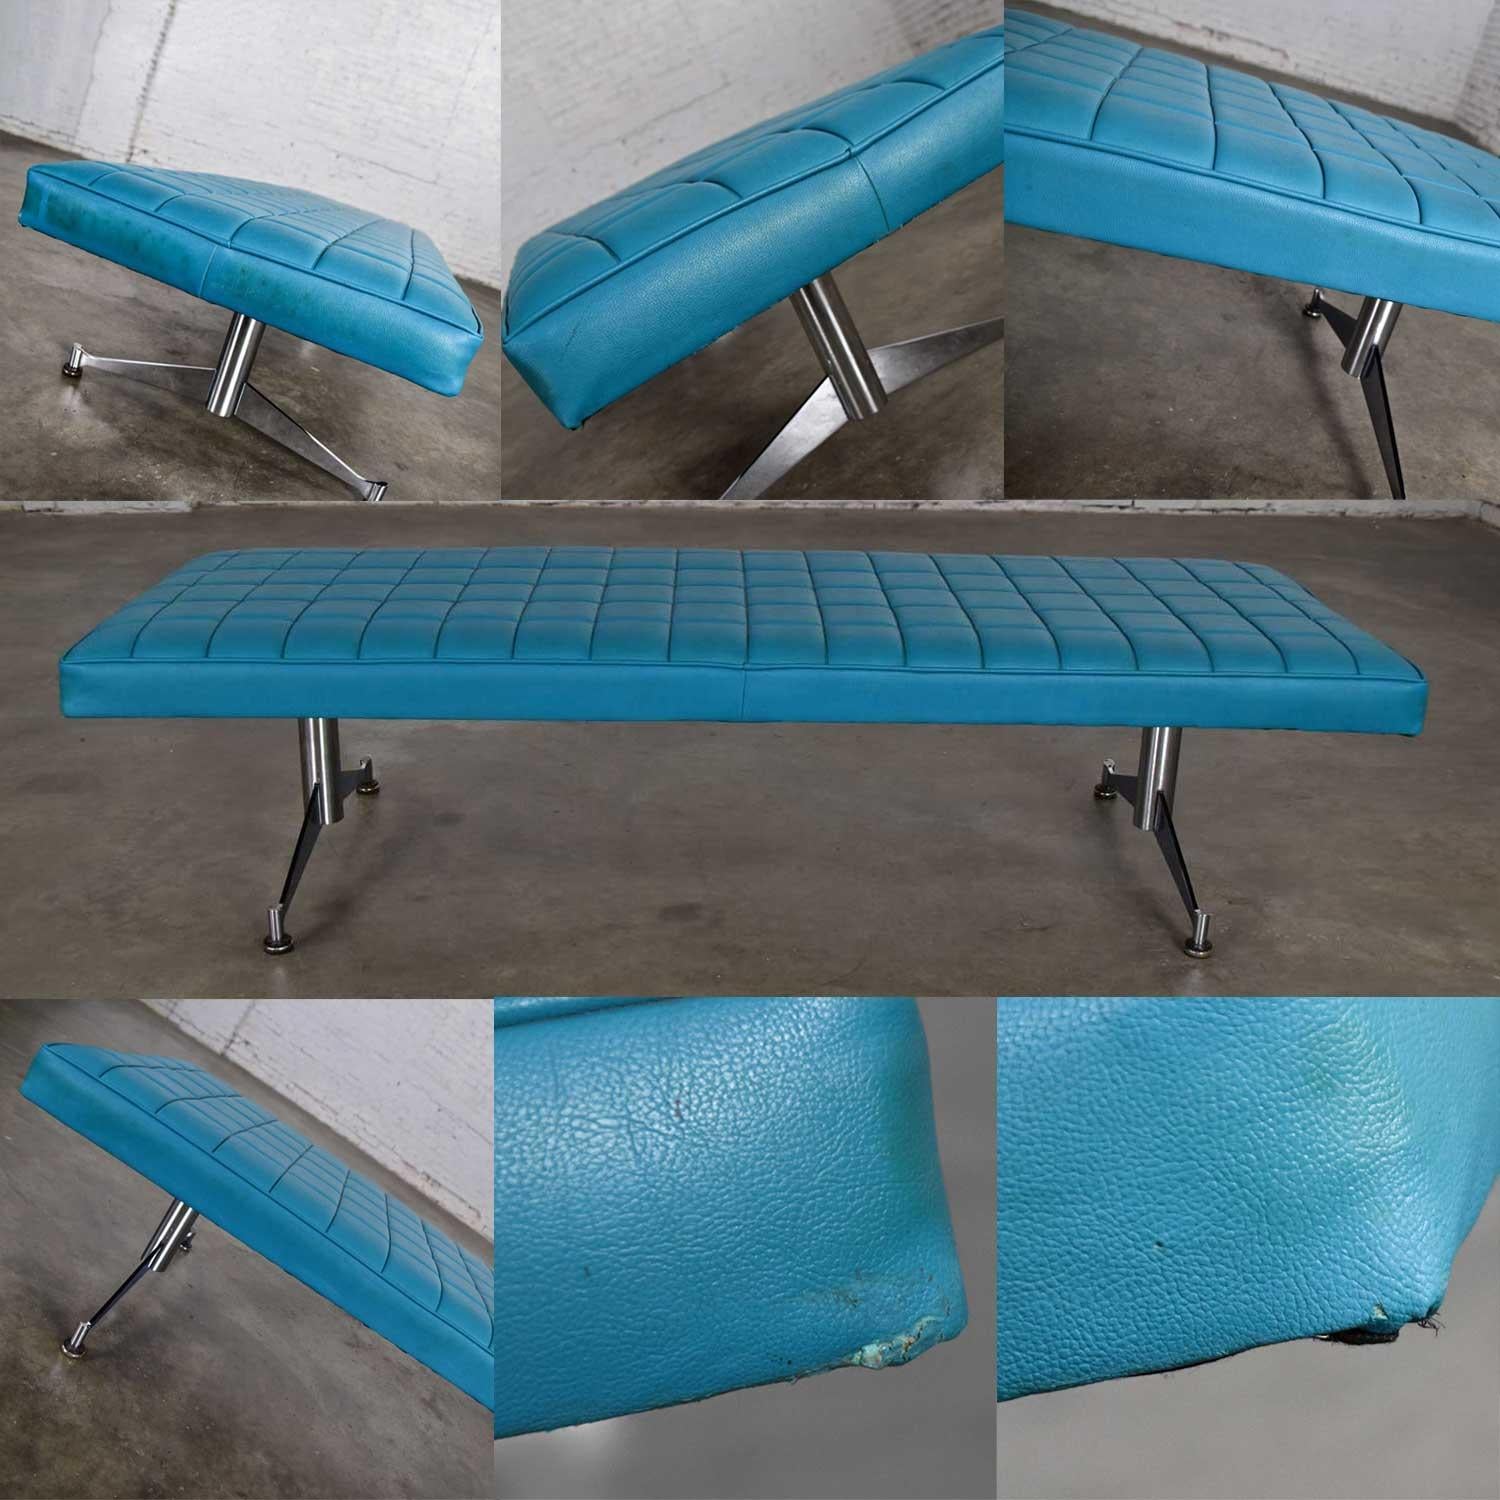 Madison Furn. Vinyl Faux Leather Turquoise Chrome Bench Daybed Style A. Umanoff For Sale 10